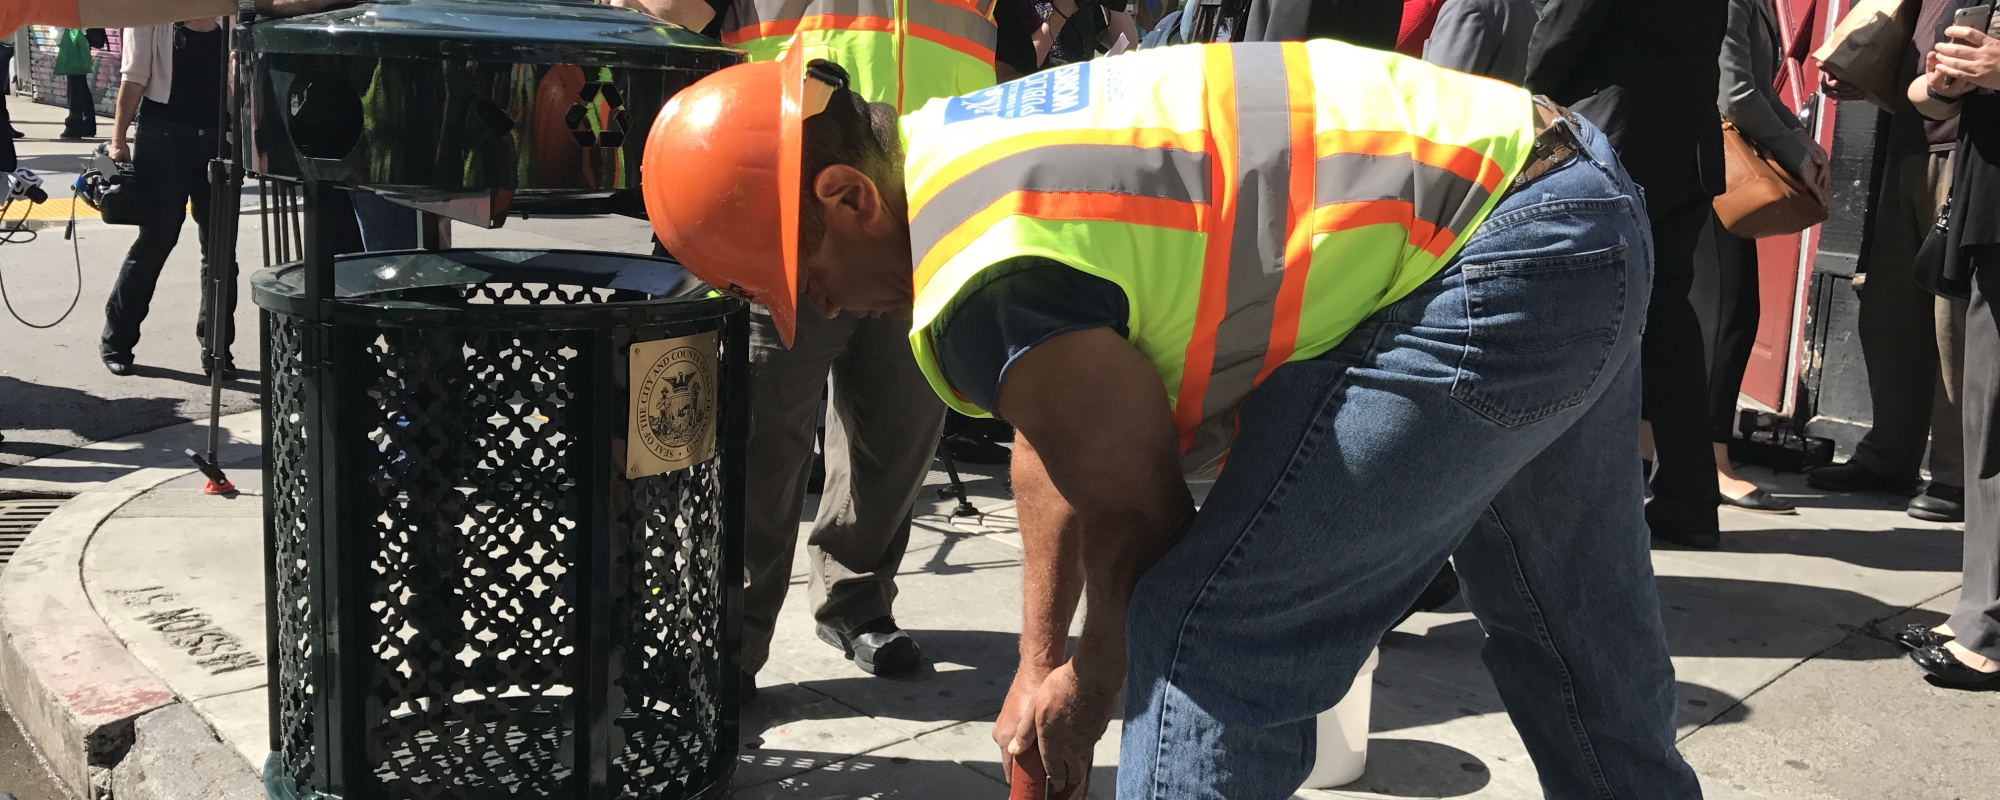 Public Works Staff cleaning up litter